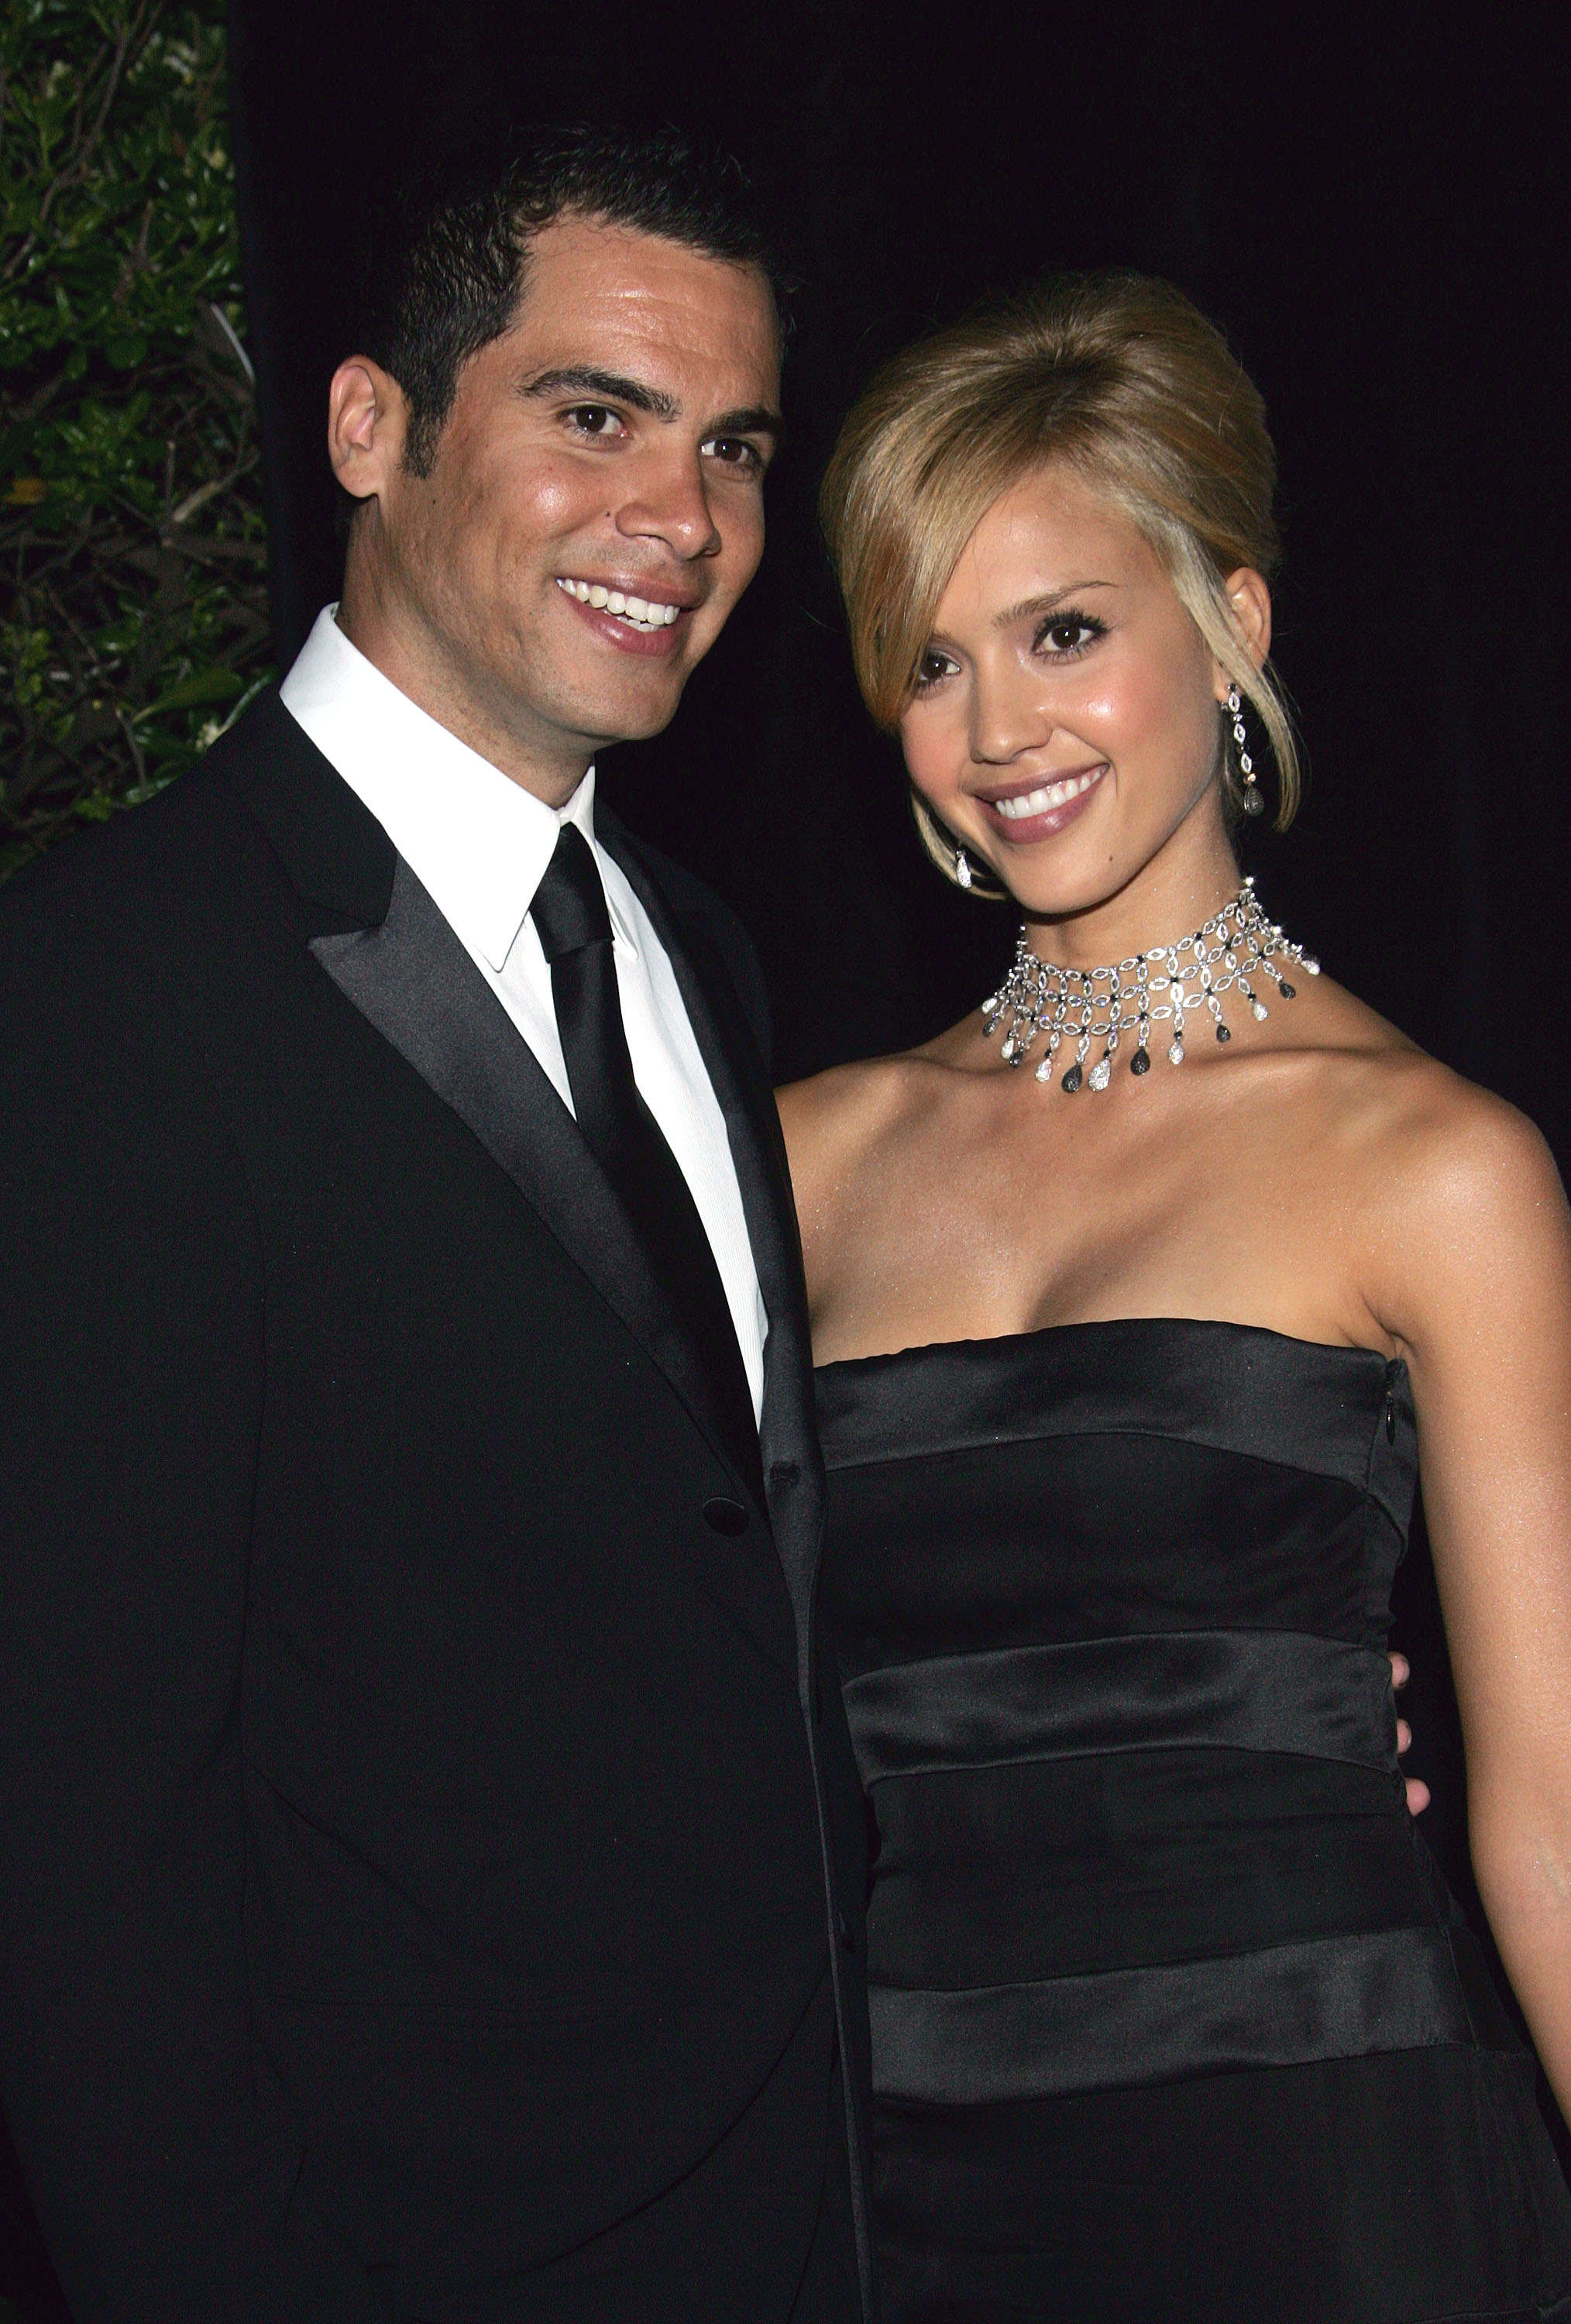 Jessica Alba and Cash Warren pictured at the Cannes Film Festival in May 2005